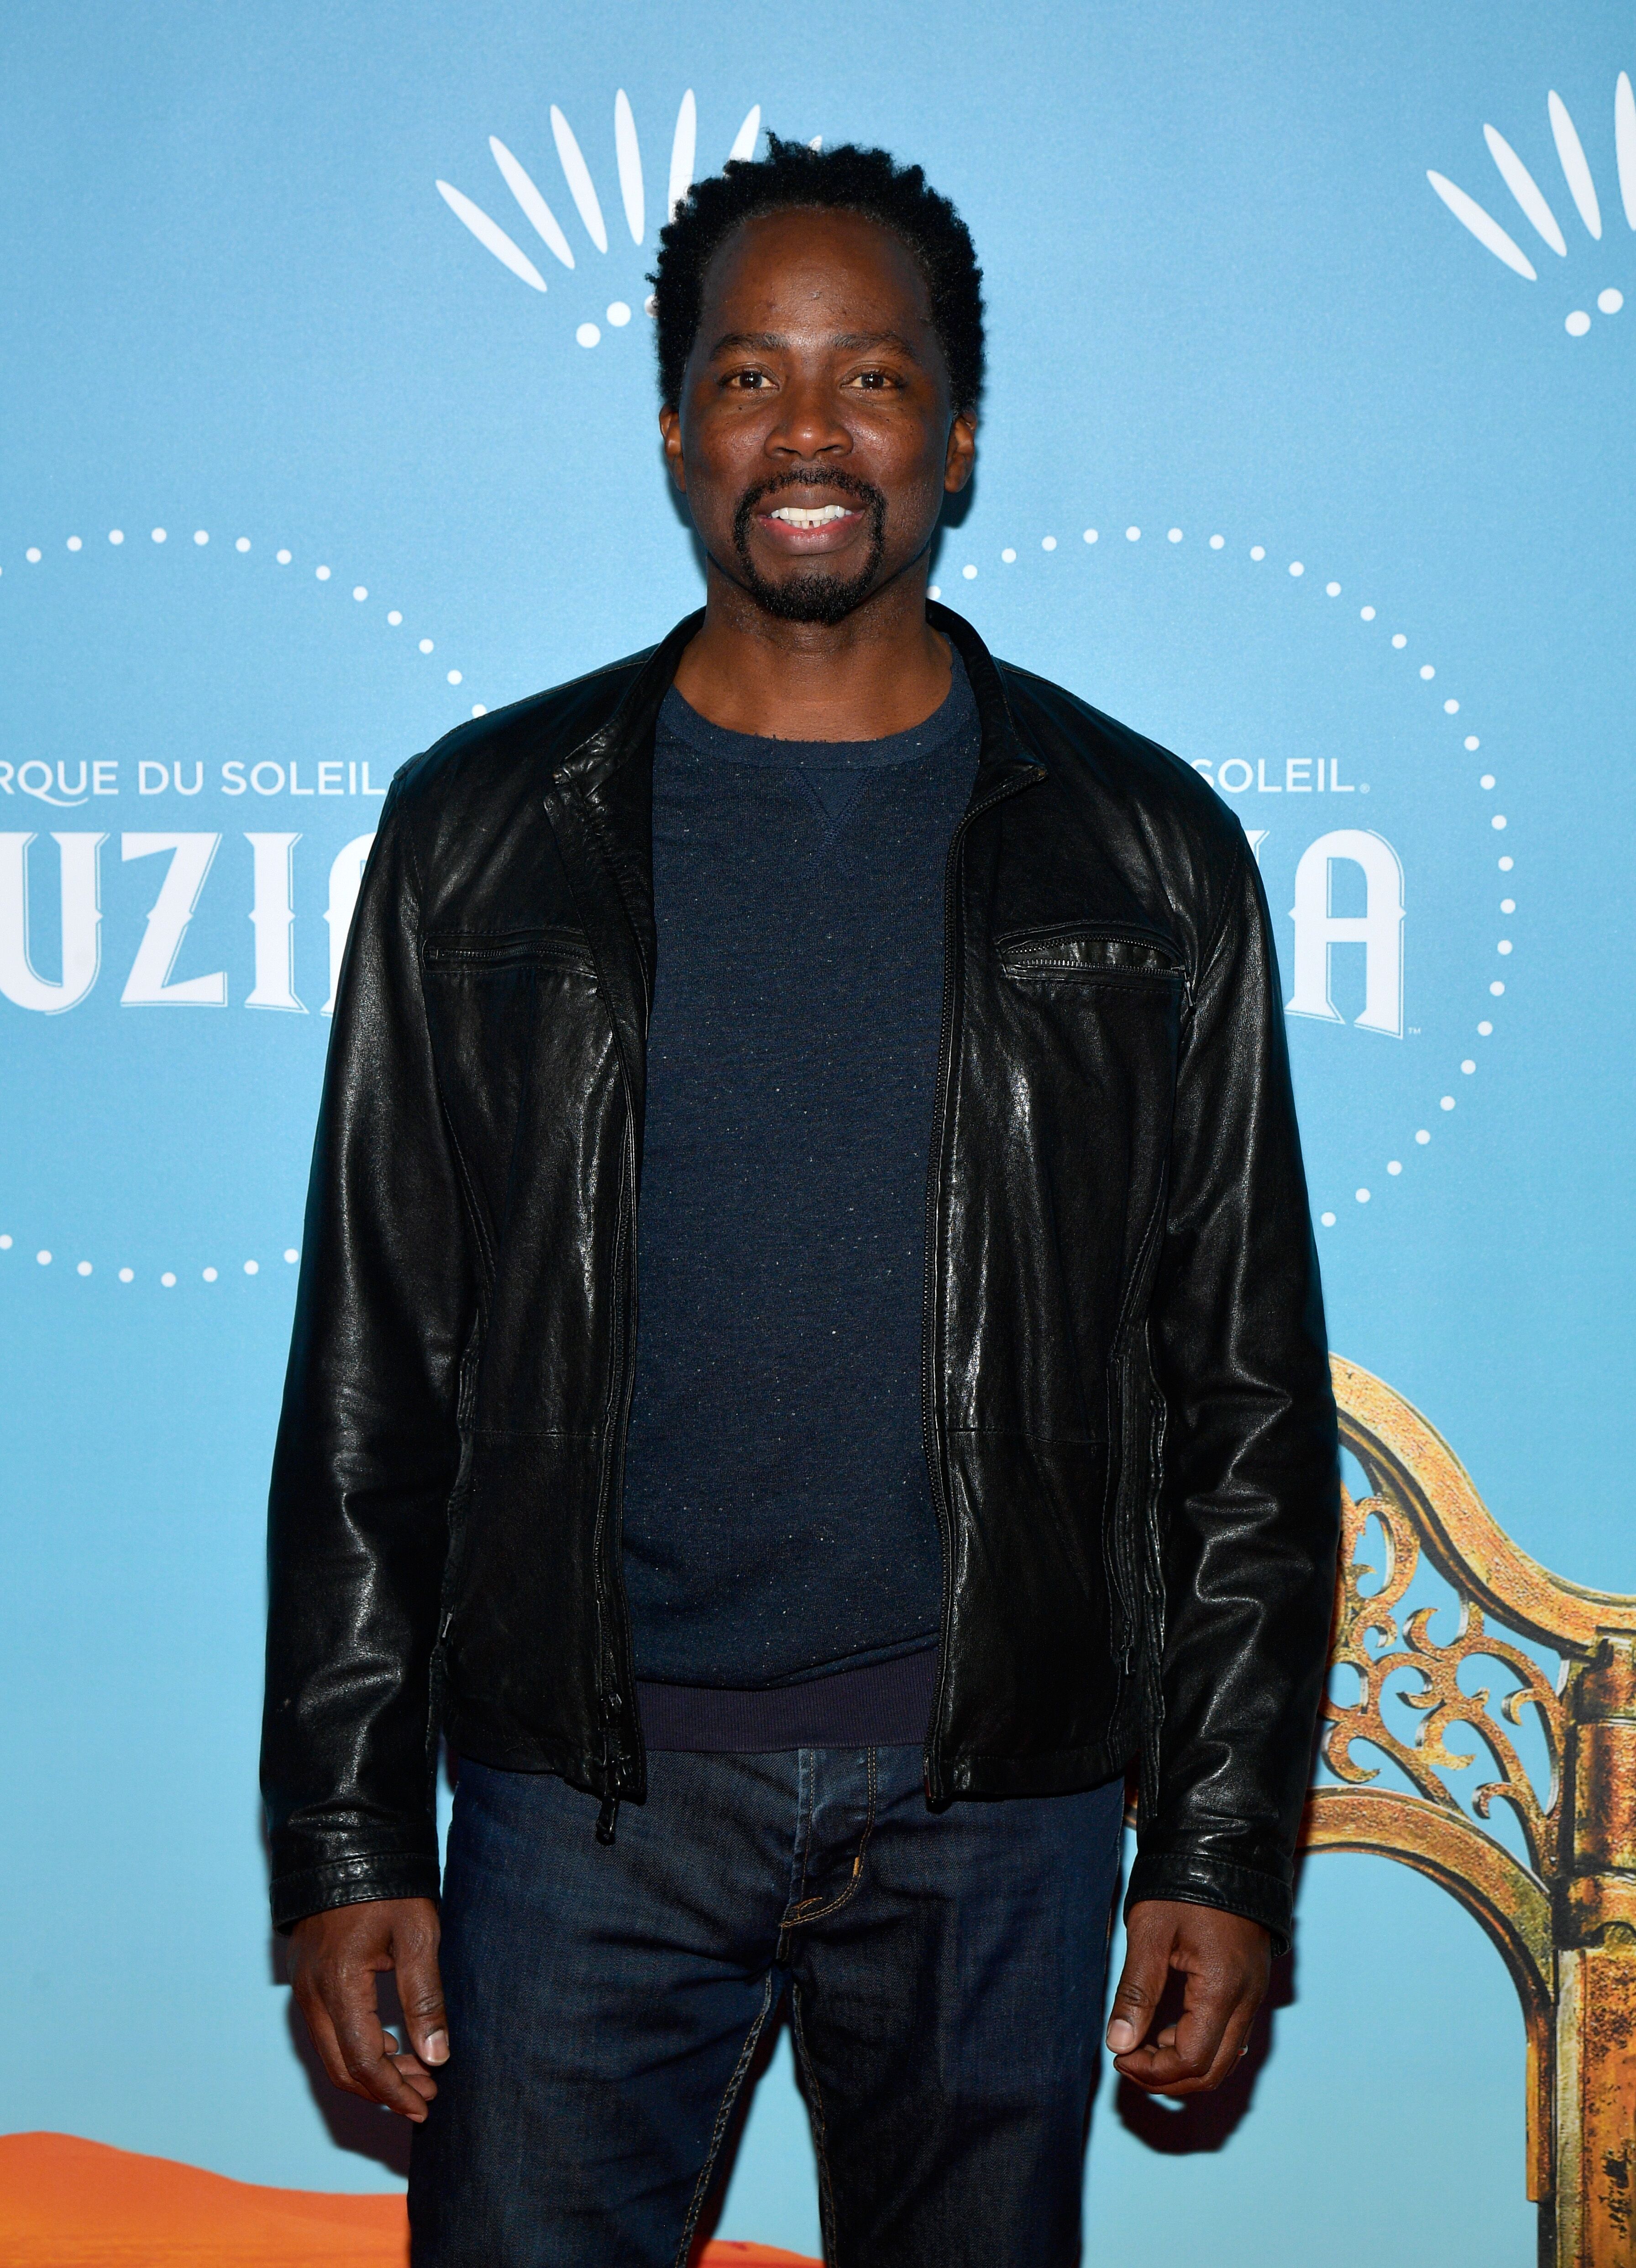 Harold Perrineau attends Cirque du Soleil presents the Los Angeles premiere event of "Luzia" at Dodger Stadium on December 12, 2017 in Los Angeles, California. | Photo: Getty Images.